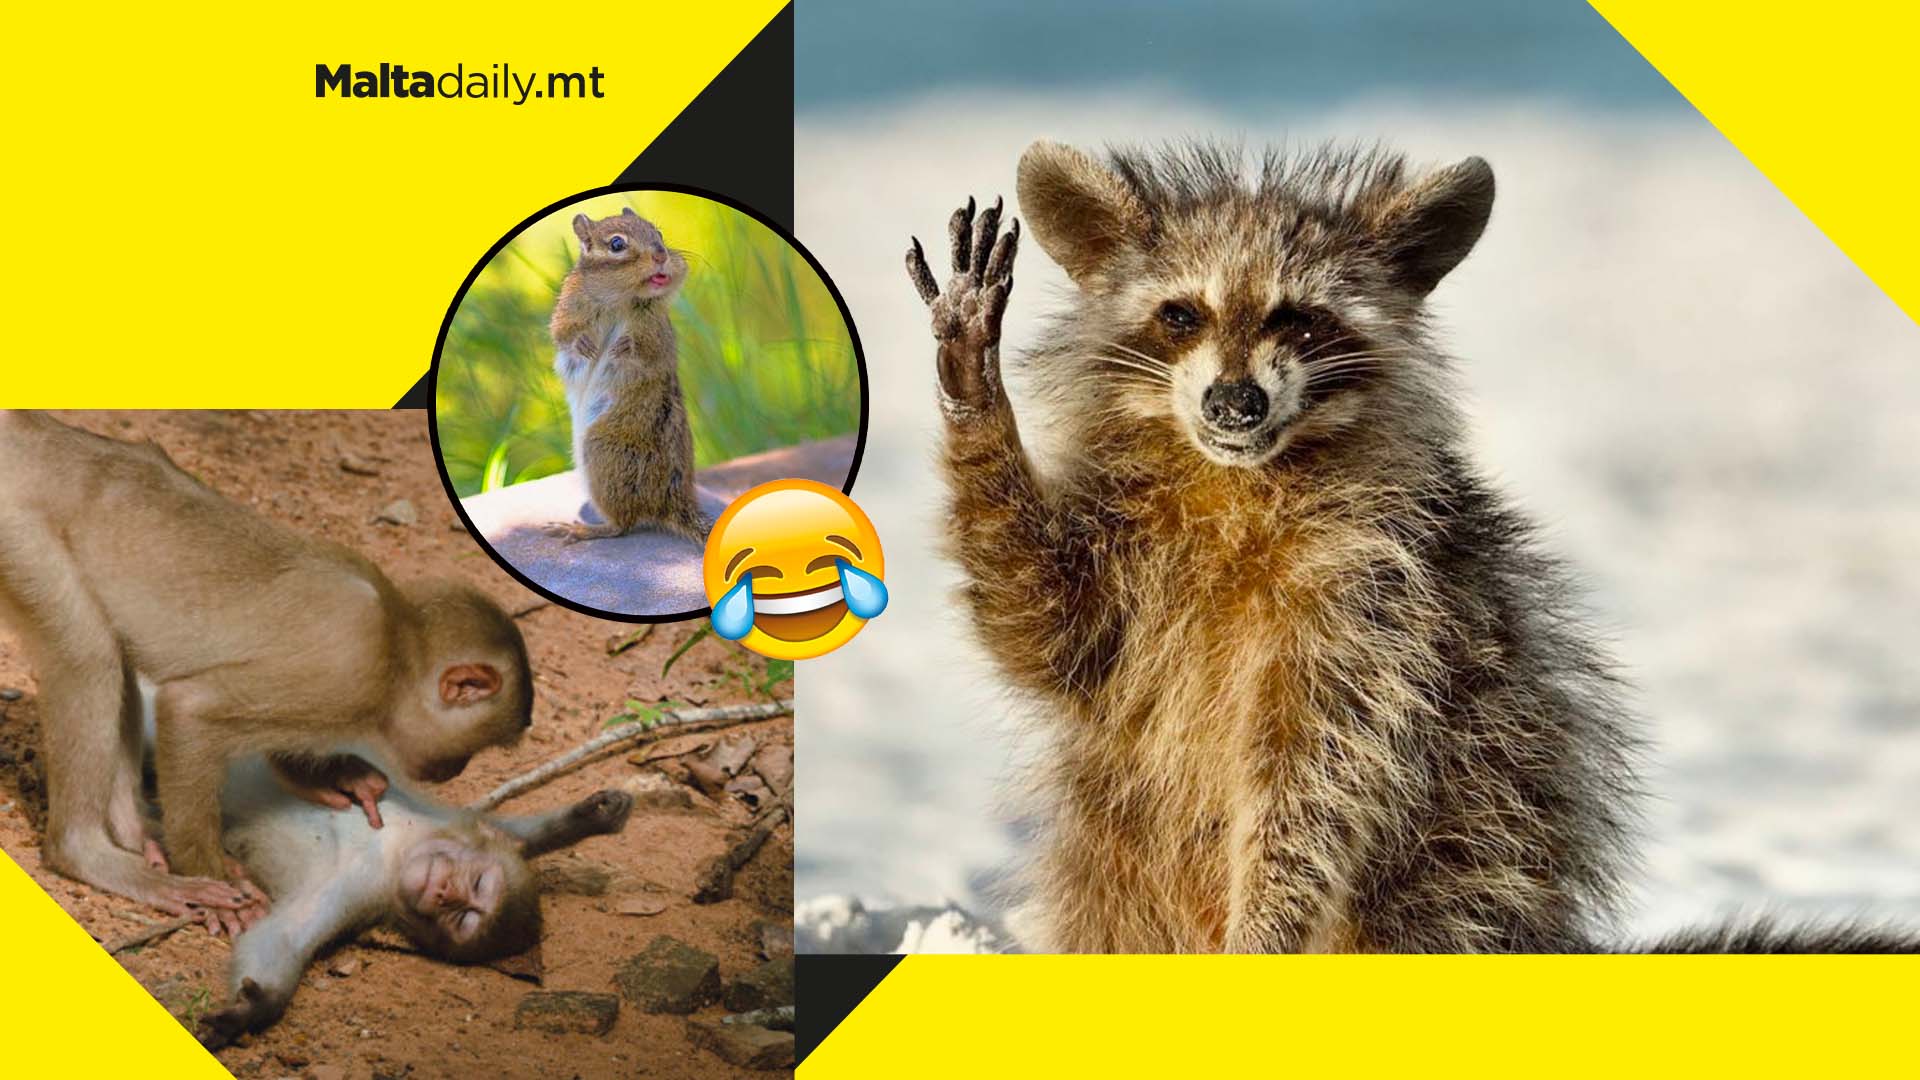 Here are some Comedy Wildlife Photo Awards finalists for 2022